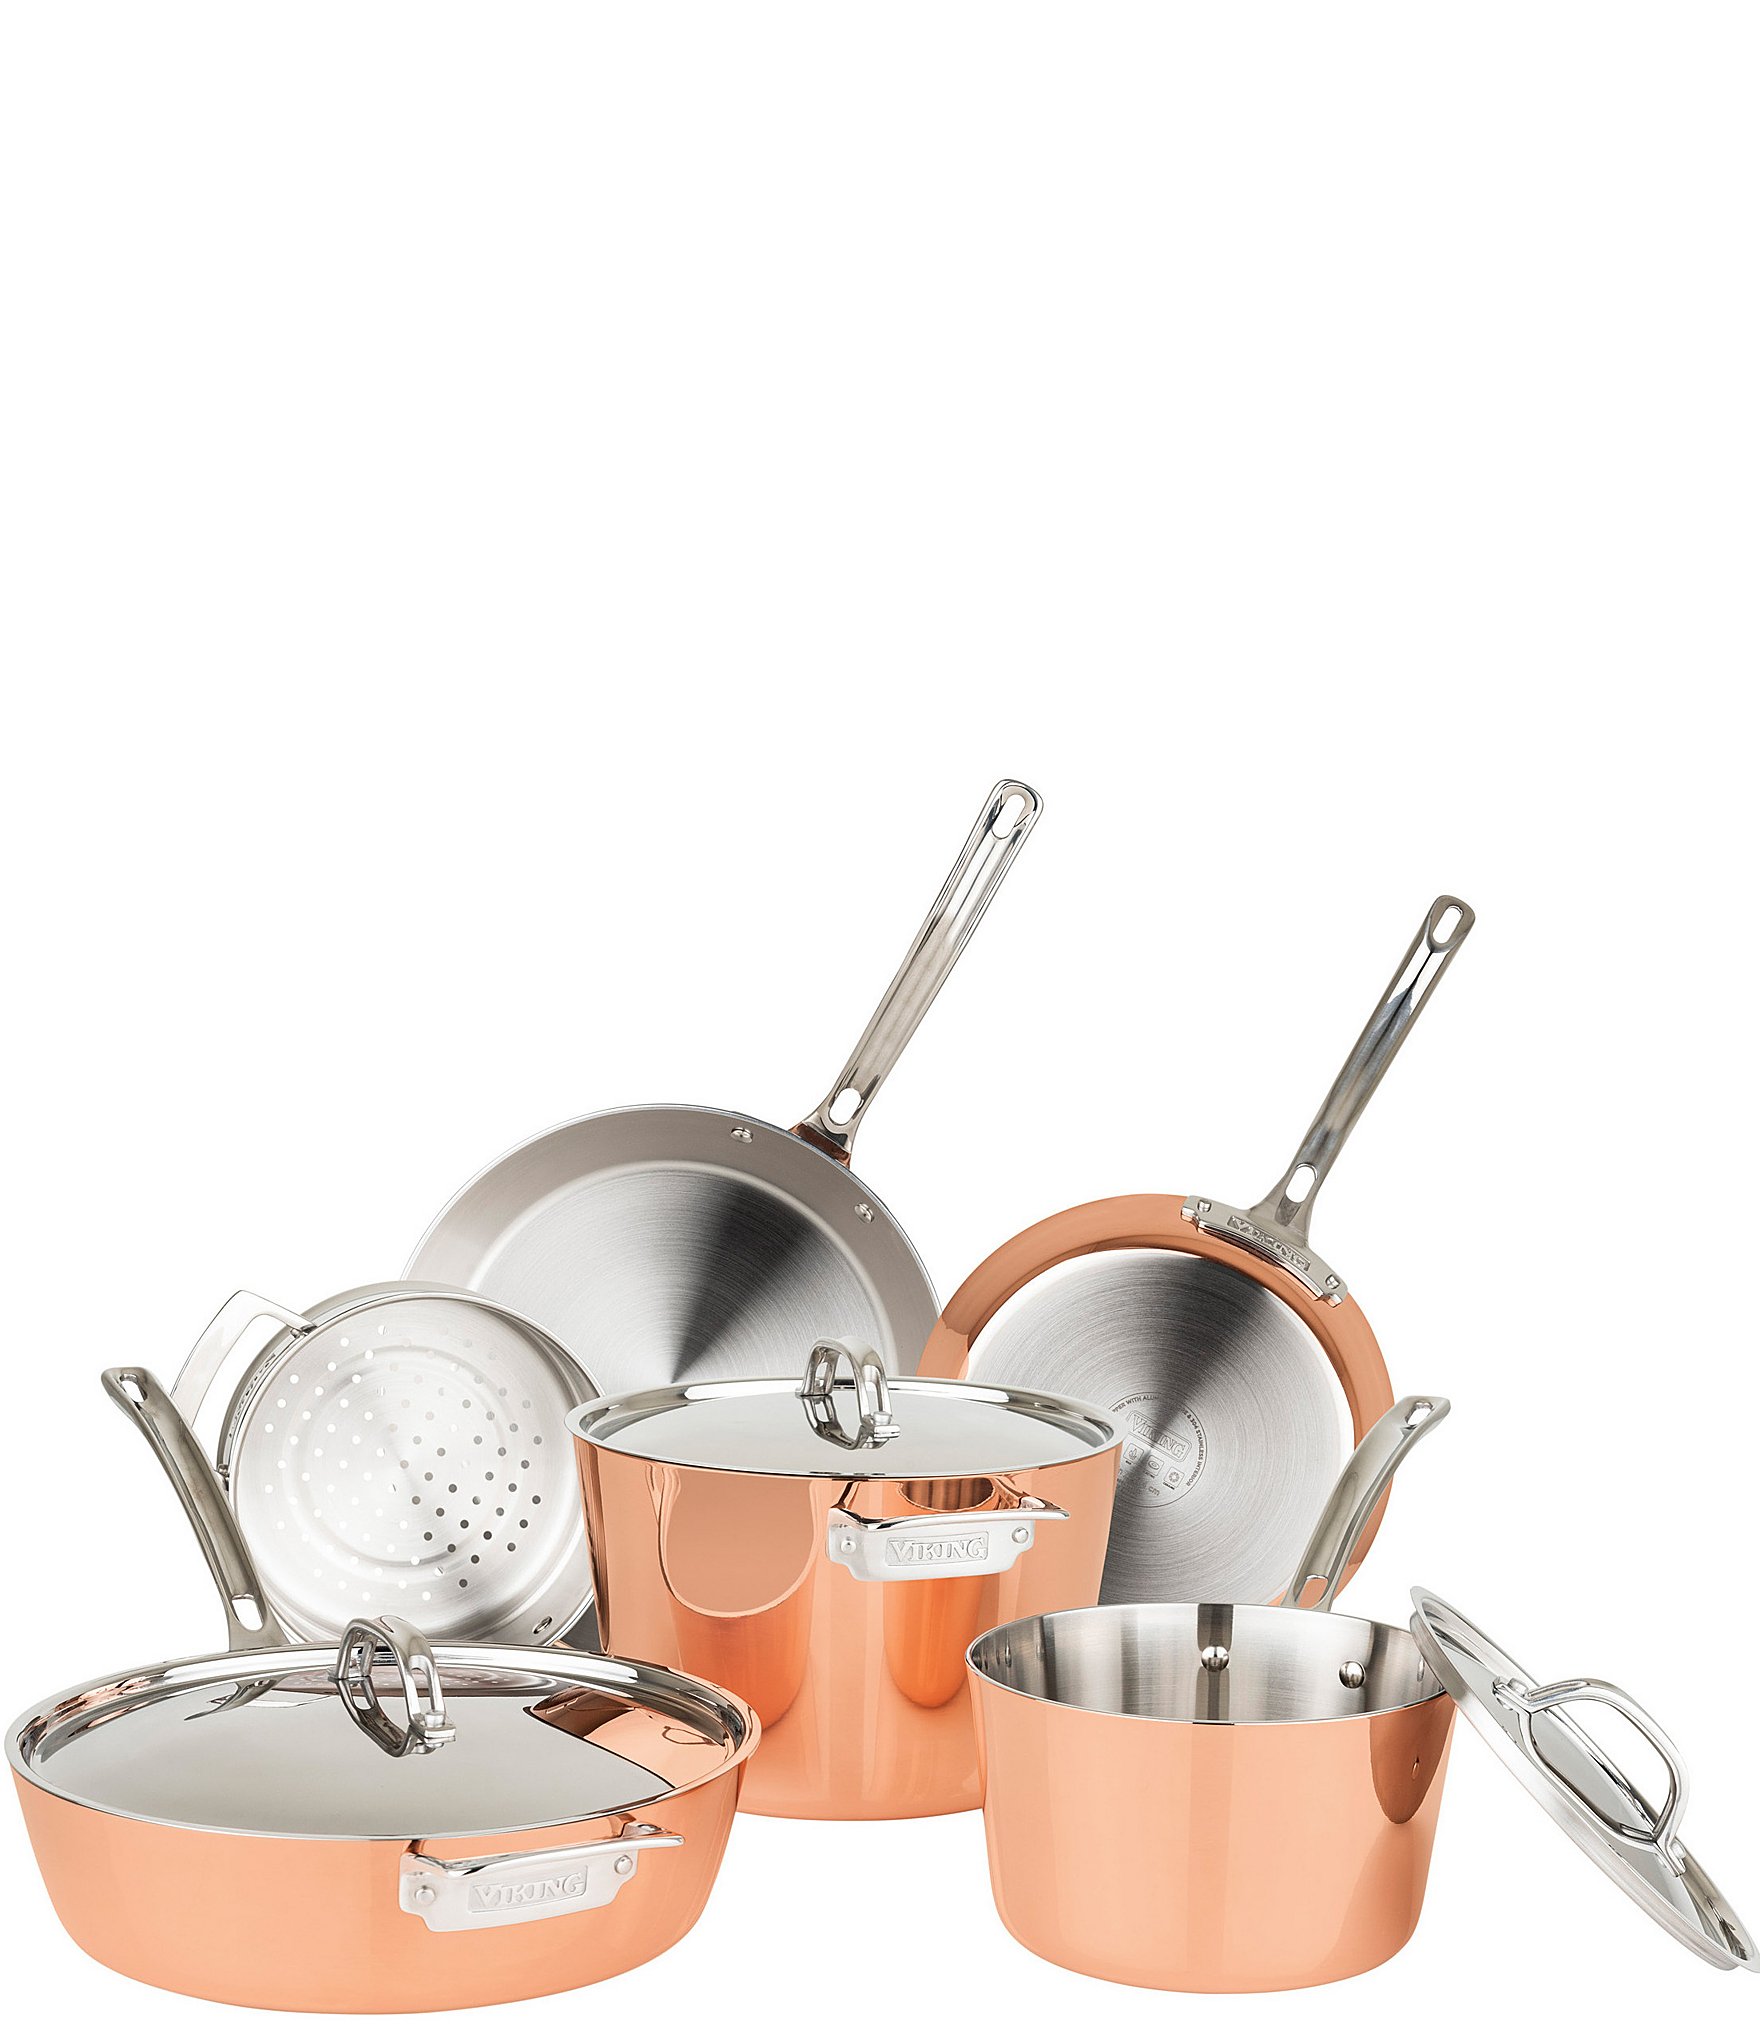 https://dimg.dillards.com/is/image/DillardsZoom/zoom/viking-contemporary-4-ply-copper-clad-9-piece-cookware-set-with-metal-lids/00000000_zi_20372194.jpg